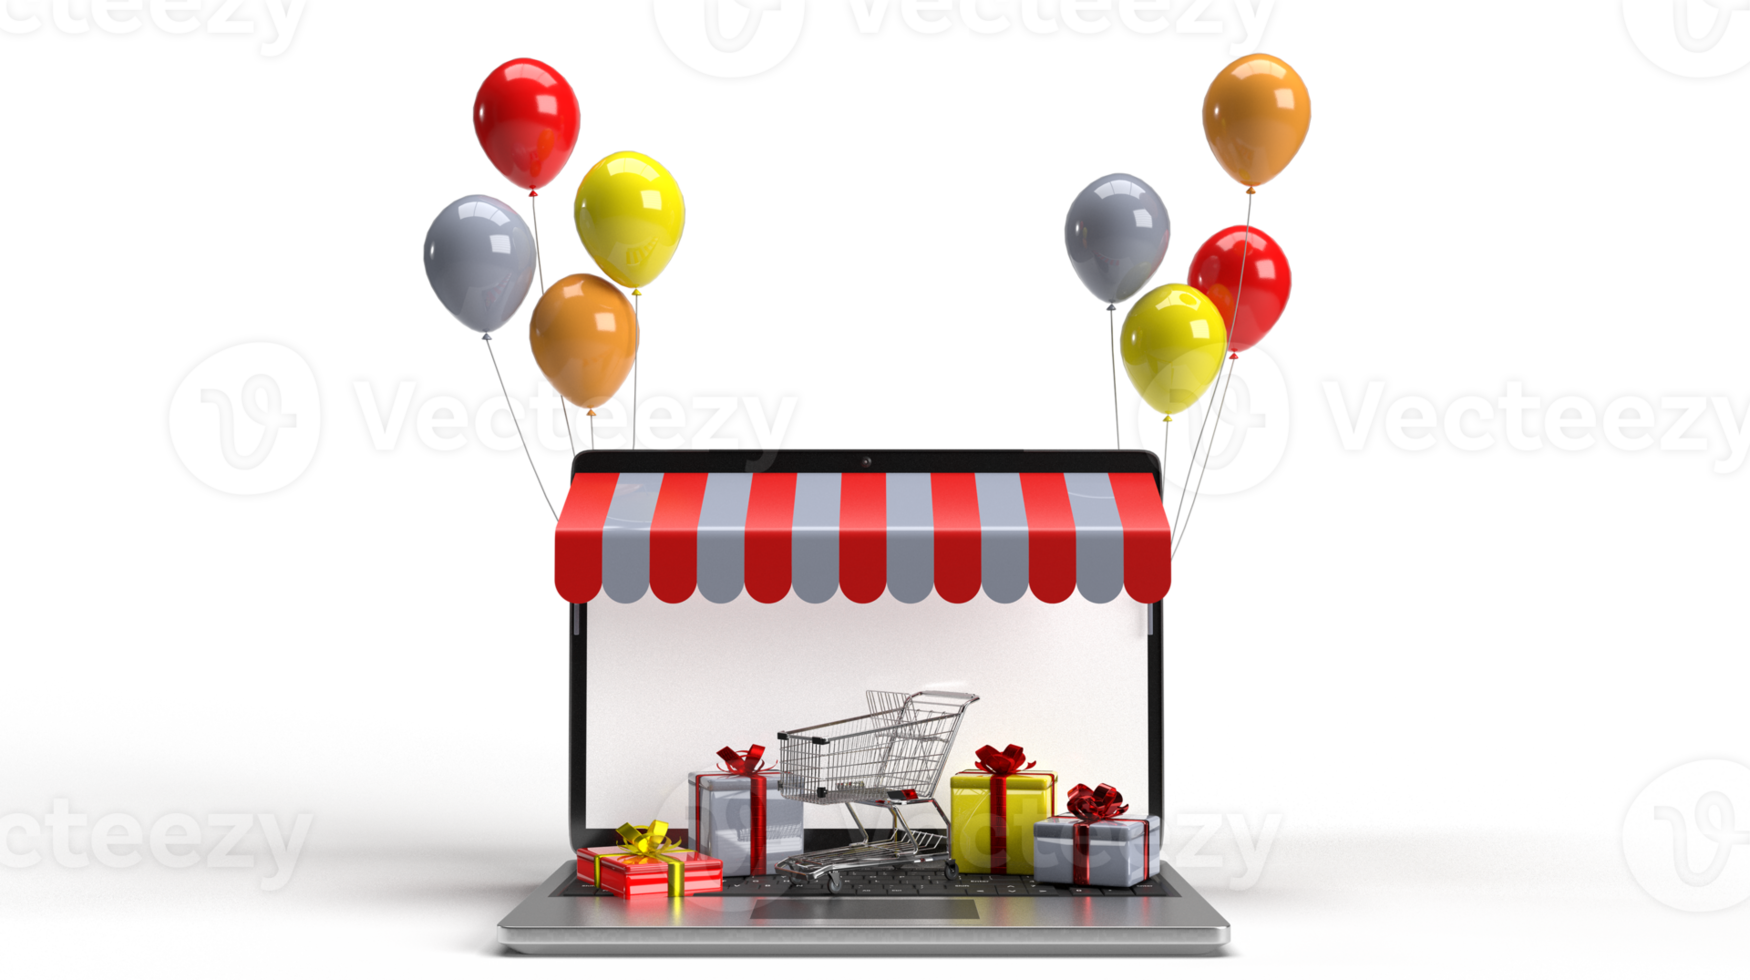 Store shopping balloon notebook computer cart gift box yellow orange red  black grey color white screen symbol decoration black friday sale surprise  november event retail business deal big.3d render 25247112 PNG